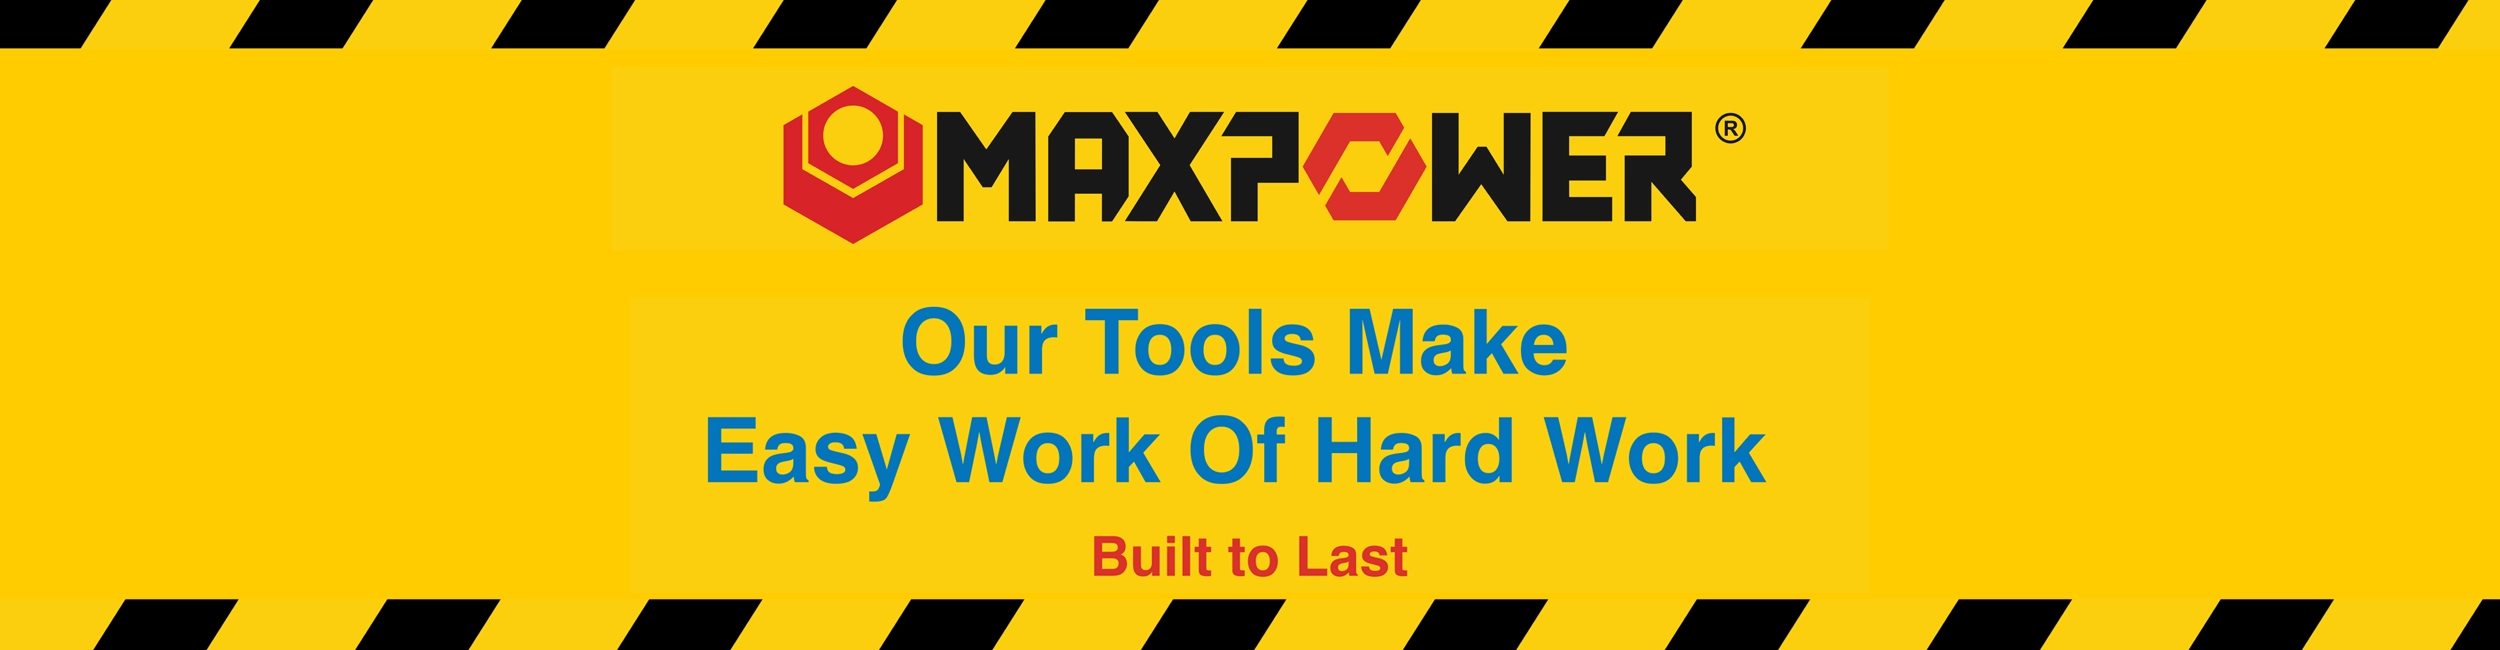 maxpower tools suppliers in uae